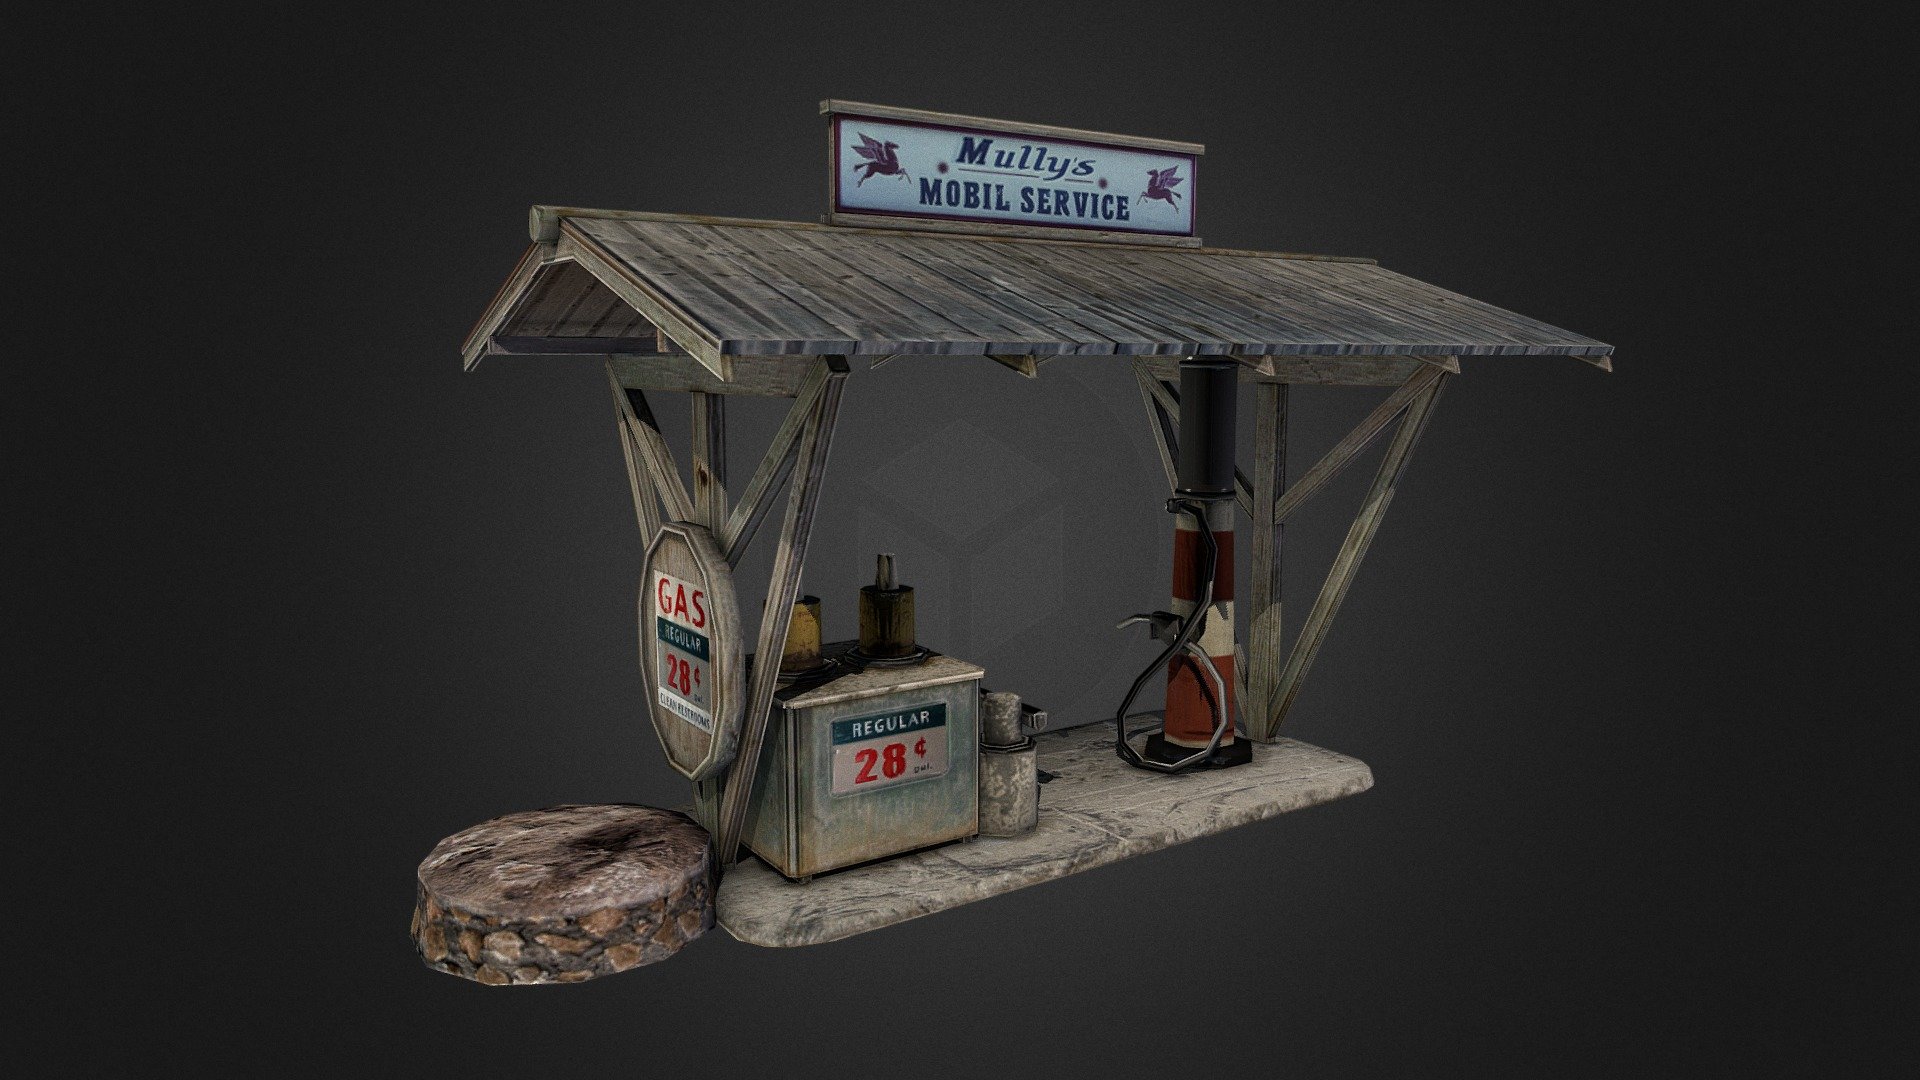 Old Gas Station asset model ready to be used in game engines and/or 3D editors (3dmax, maya, etc) This asset is perfect for your forrest themed games / scenarios 3d model